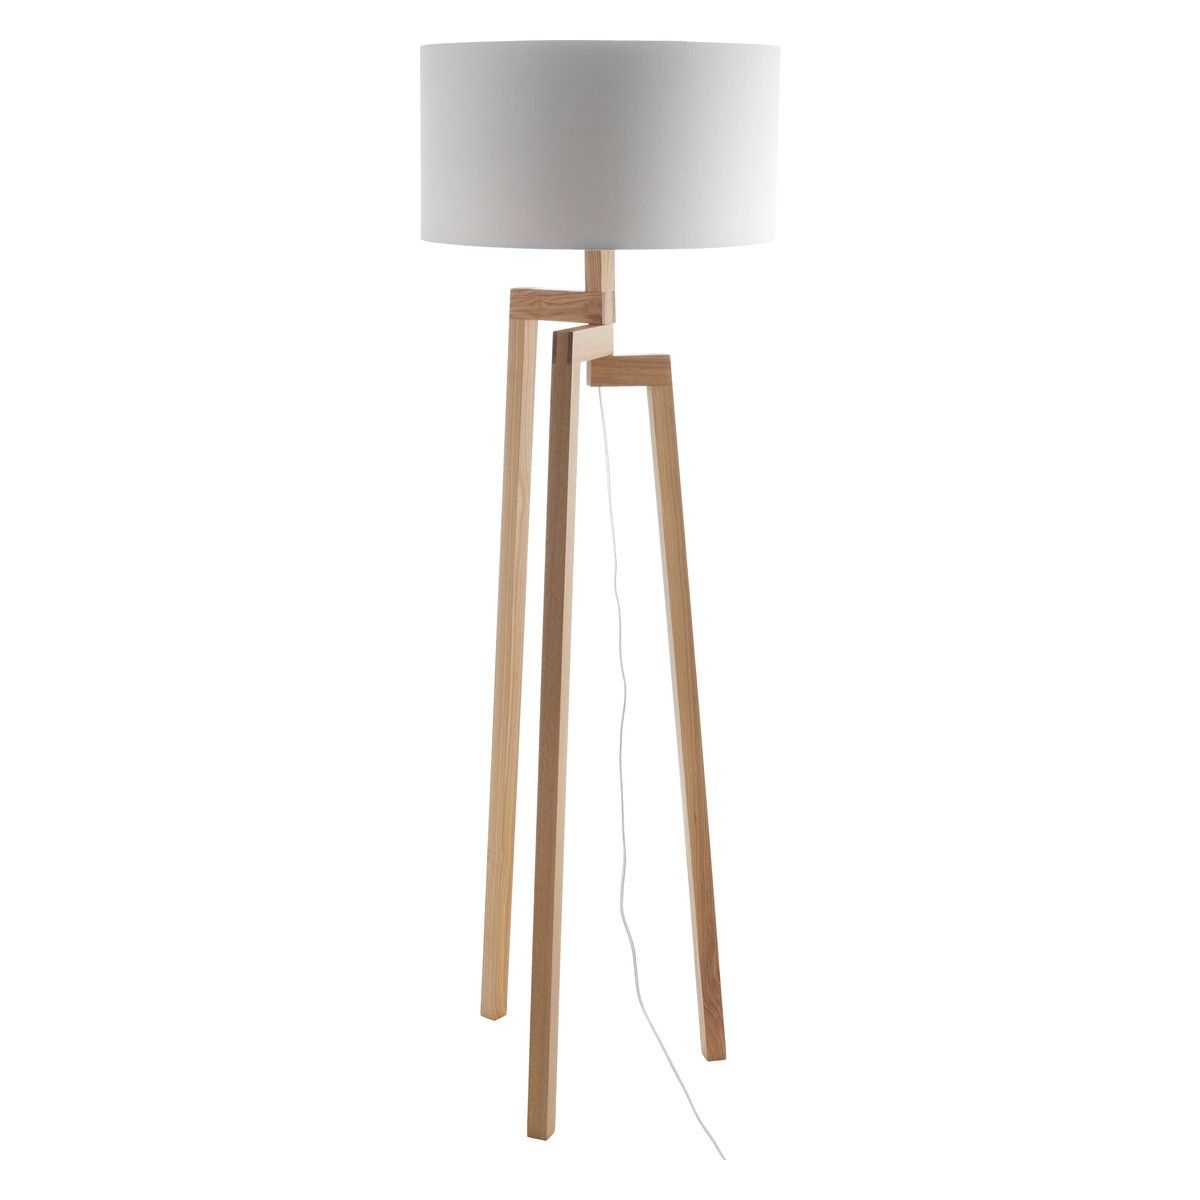 Dylan Base Ash Wooden Floor Lamp In 2019 Wooden Floor pertaining to dimensions 1200 X 1200